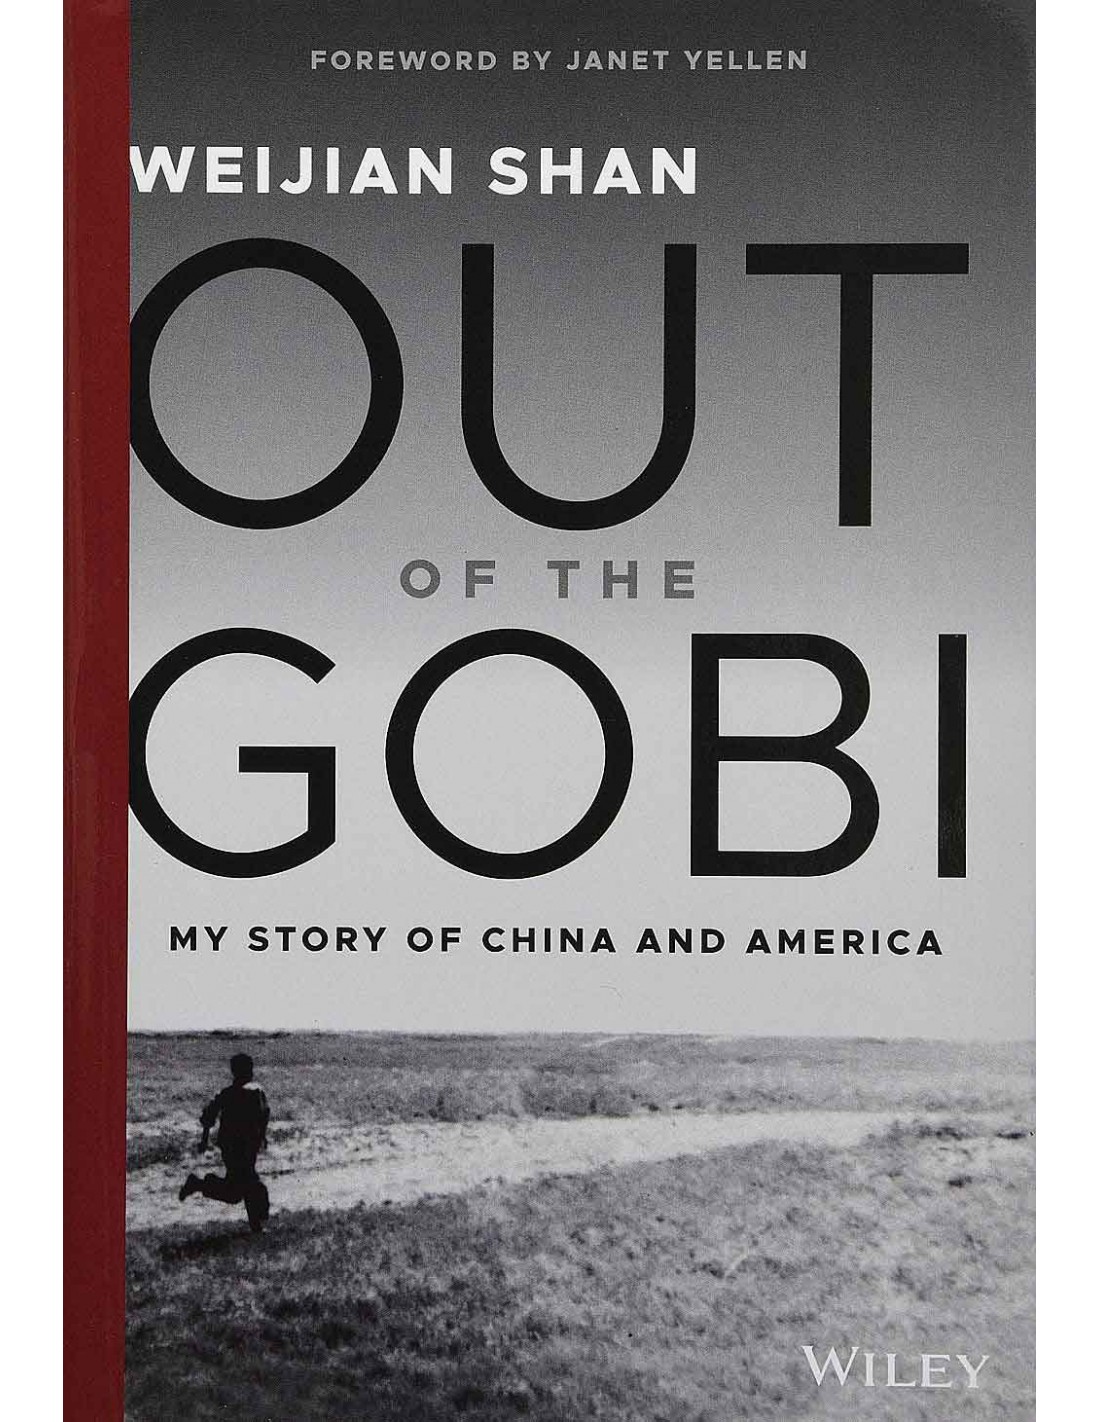 My Story of China and America Out of the Gobi